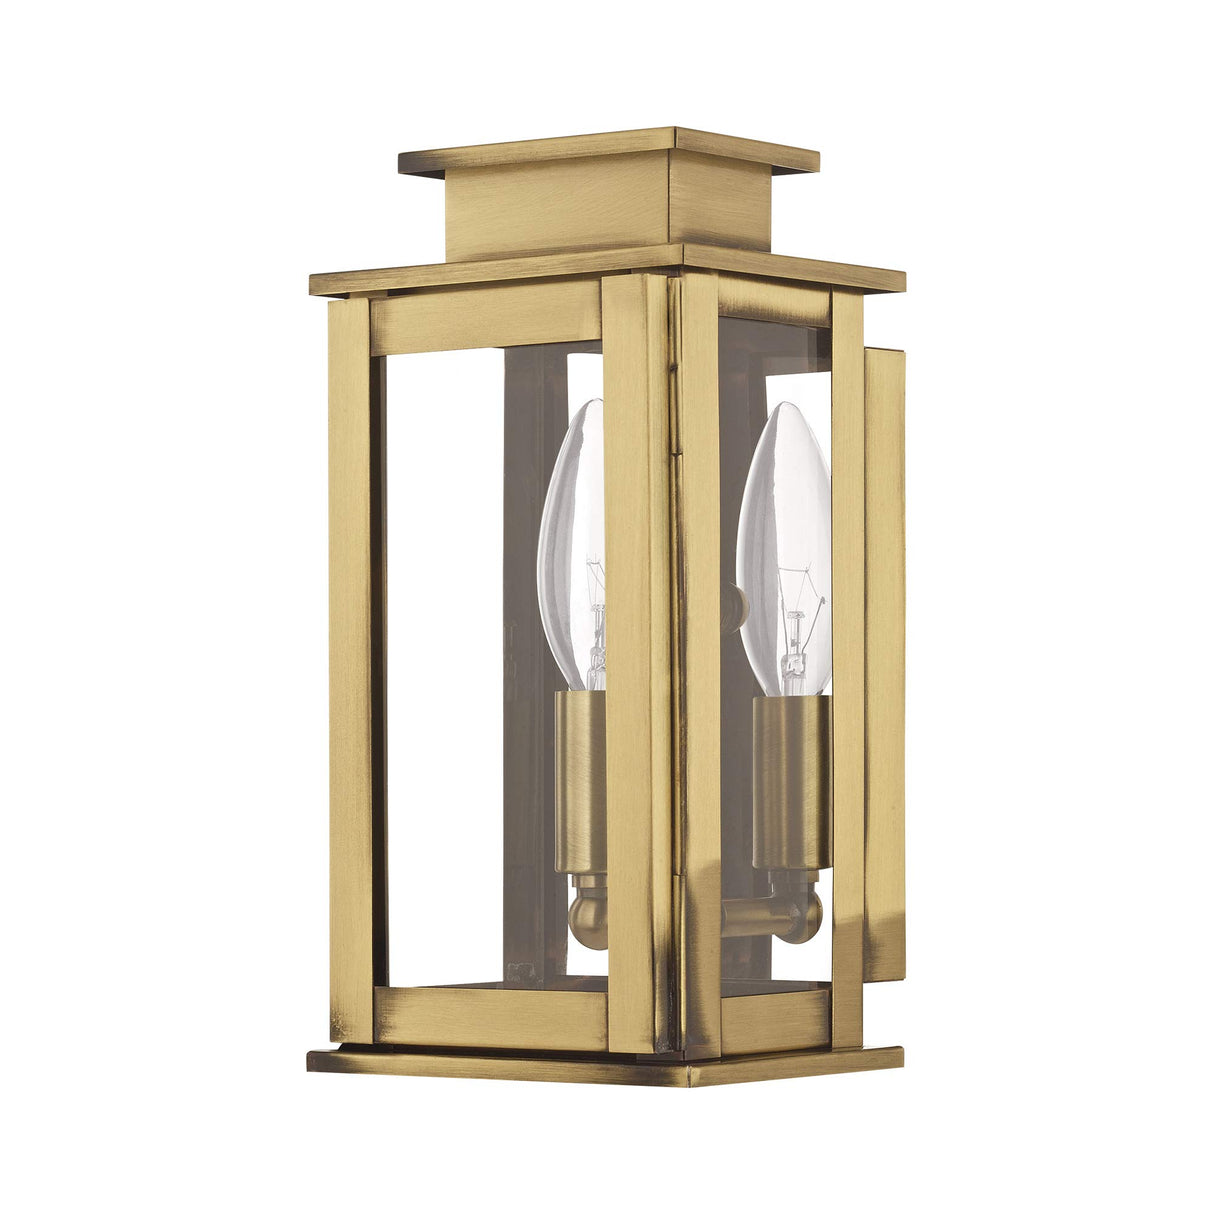 Livex Lighting 20191-01 Transitional One Light Outdoor Wall Lantern from Princeton Collection Finish, Antique Brass